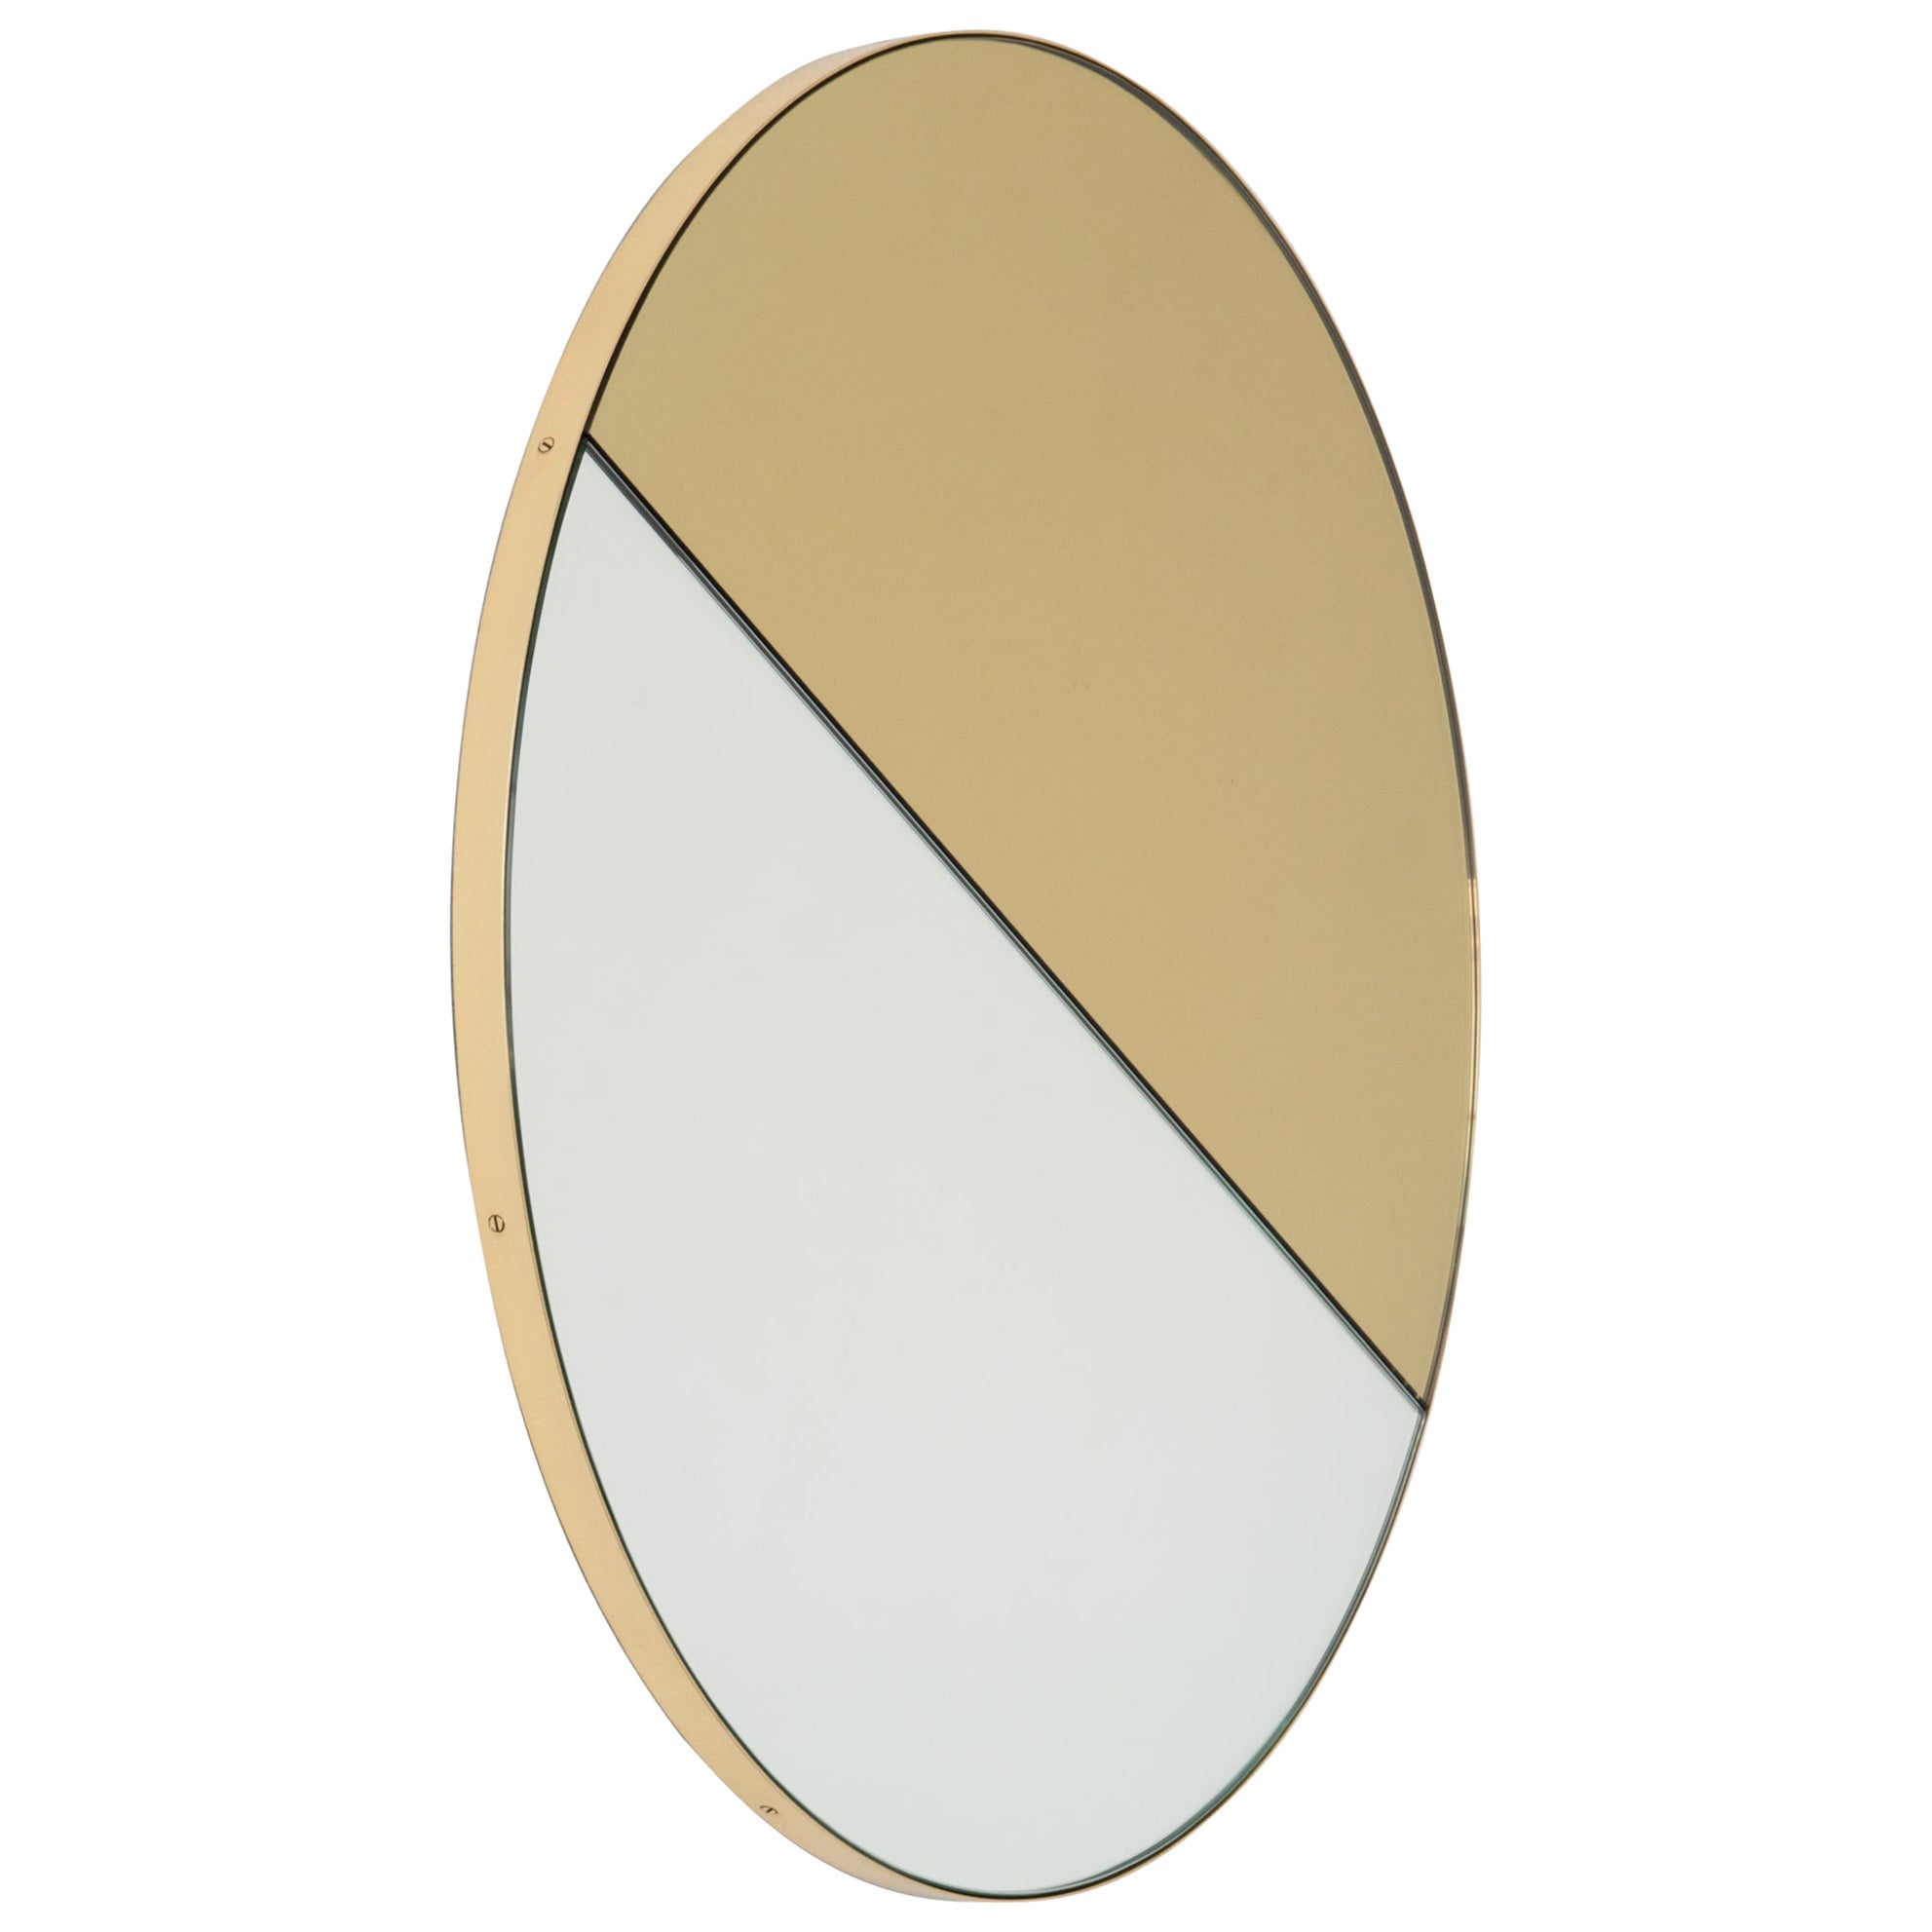 In Stock Orbis Dualis Round Gold Silver Tinted Mirror, Brass Frame, Medium For Sale